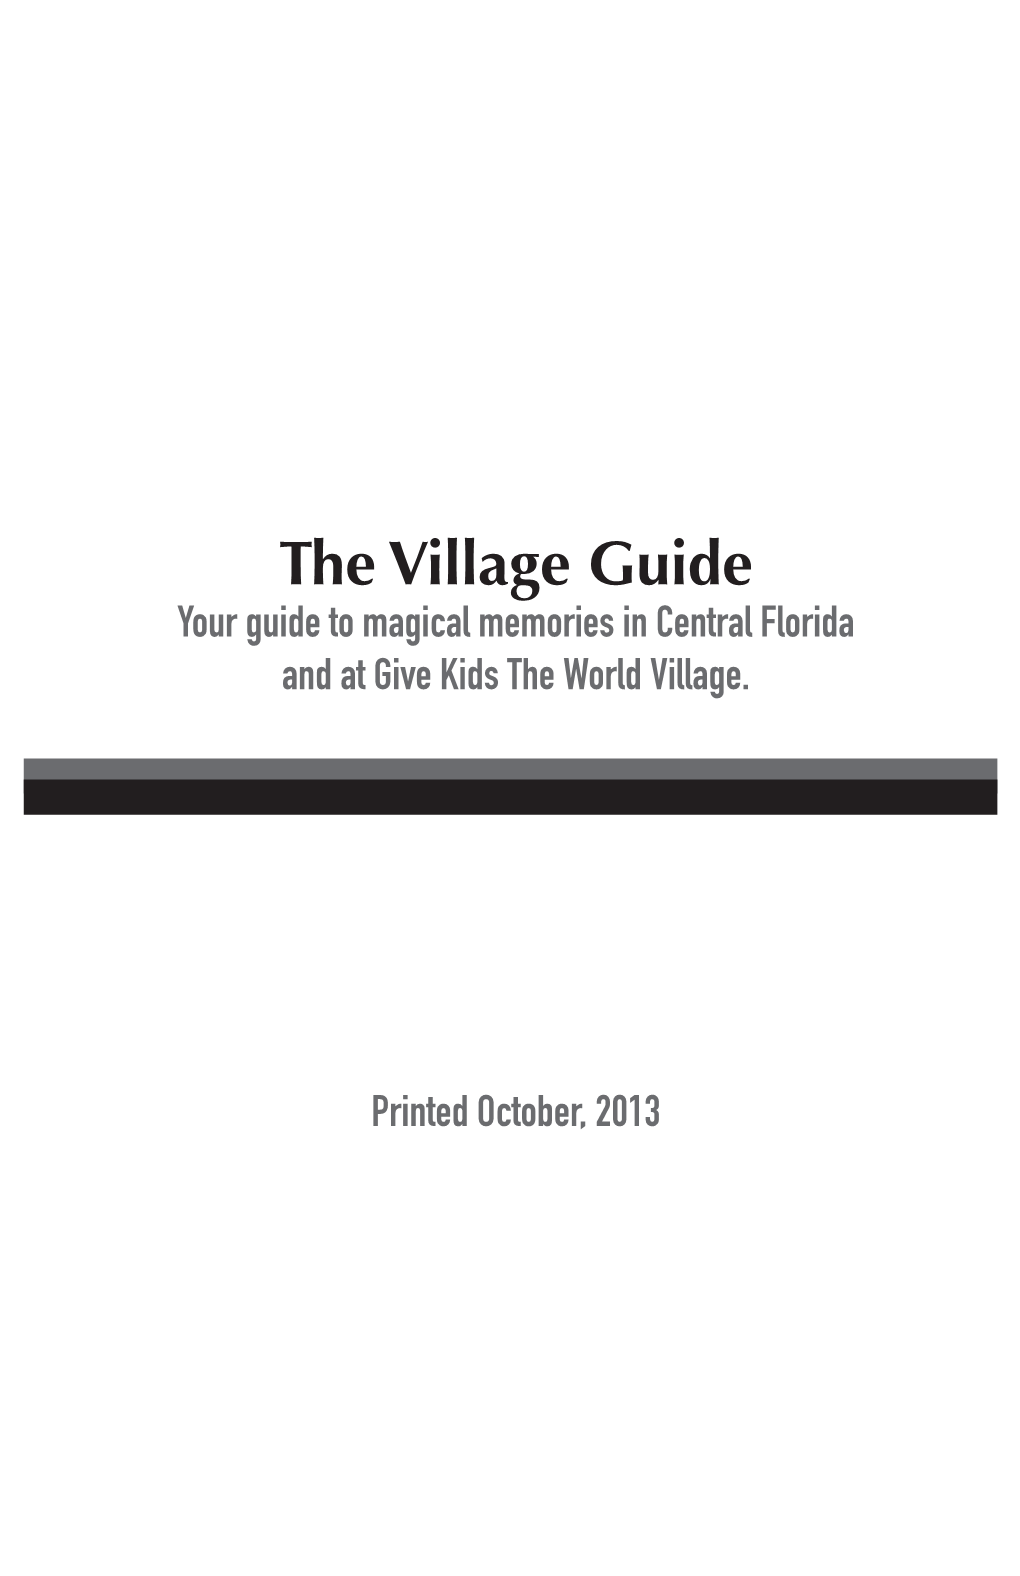 The Village Guide Your Guide to Magical Memories in Central Florida and at Give Kids the World Village